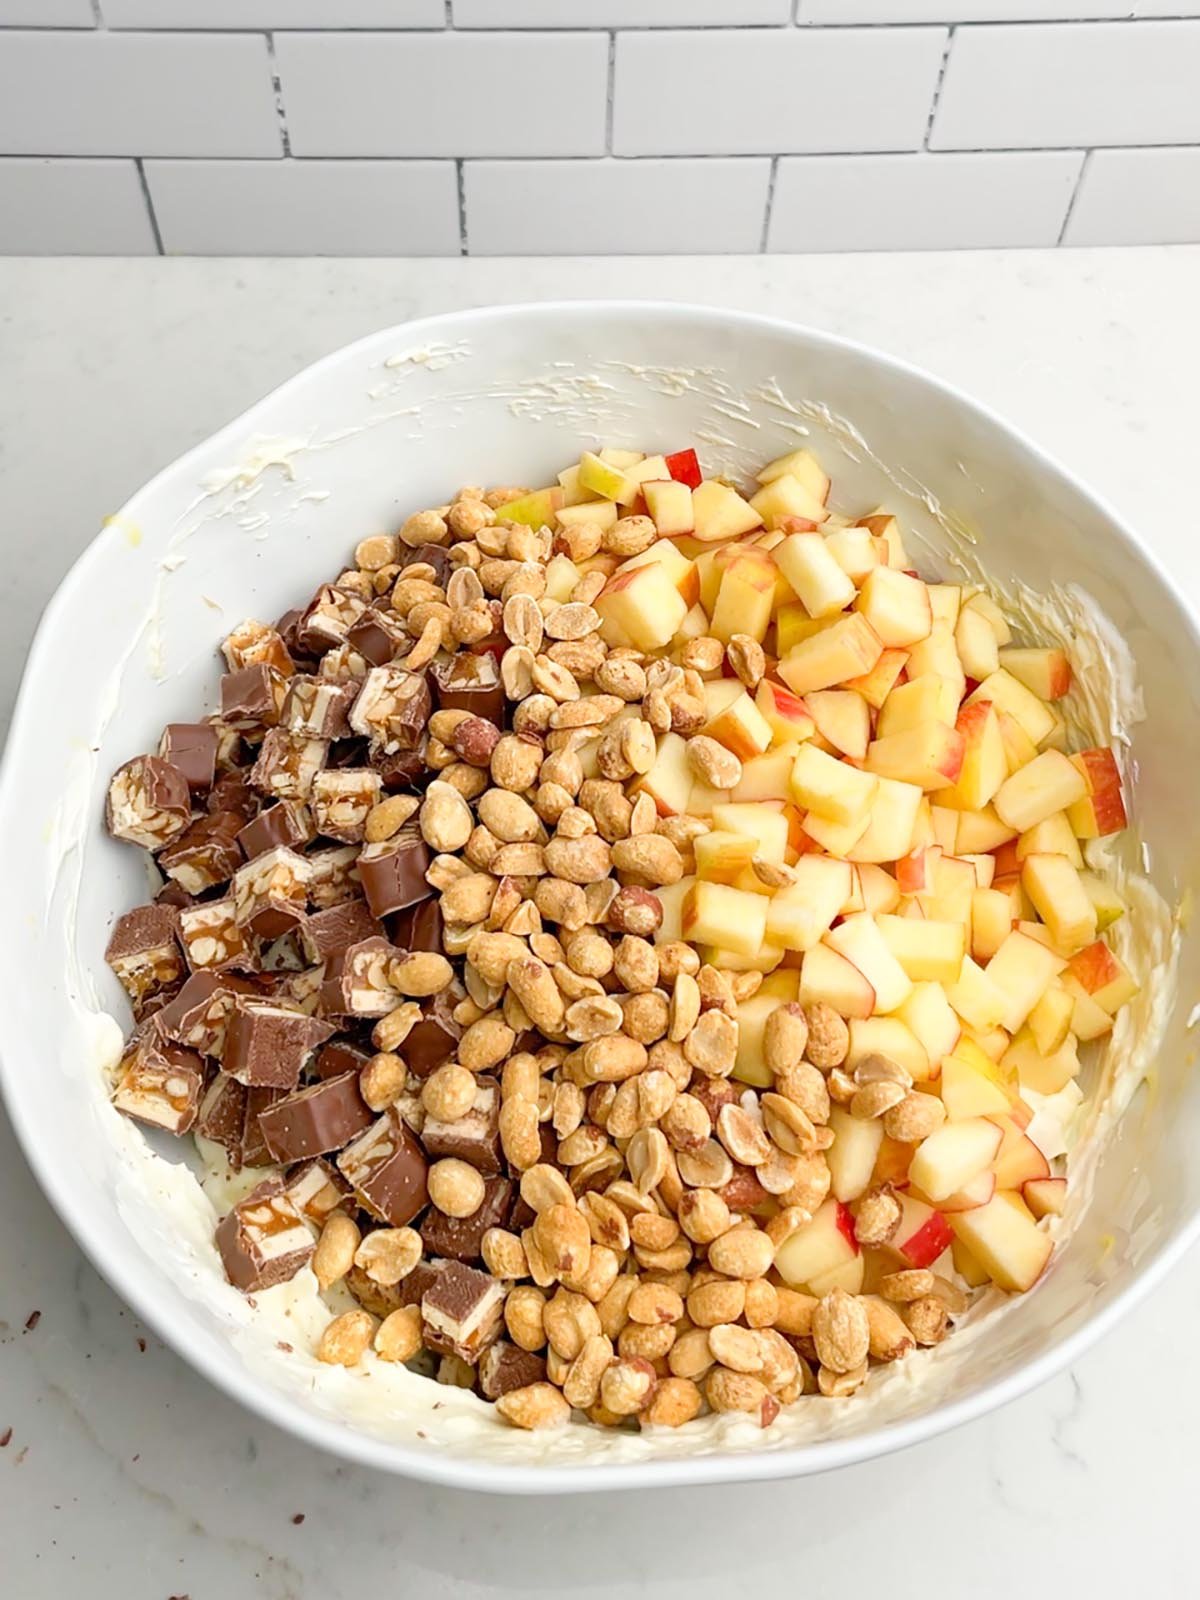 taffy apple salad ingredients in a white bowl